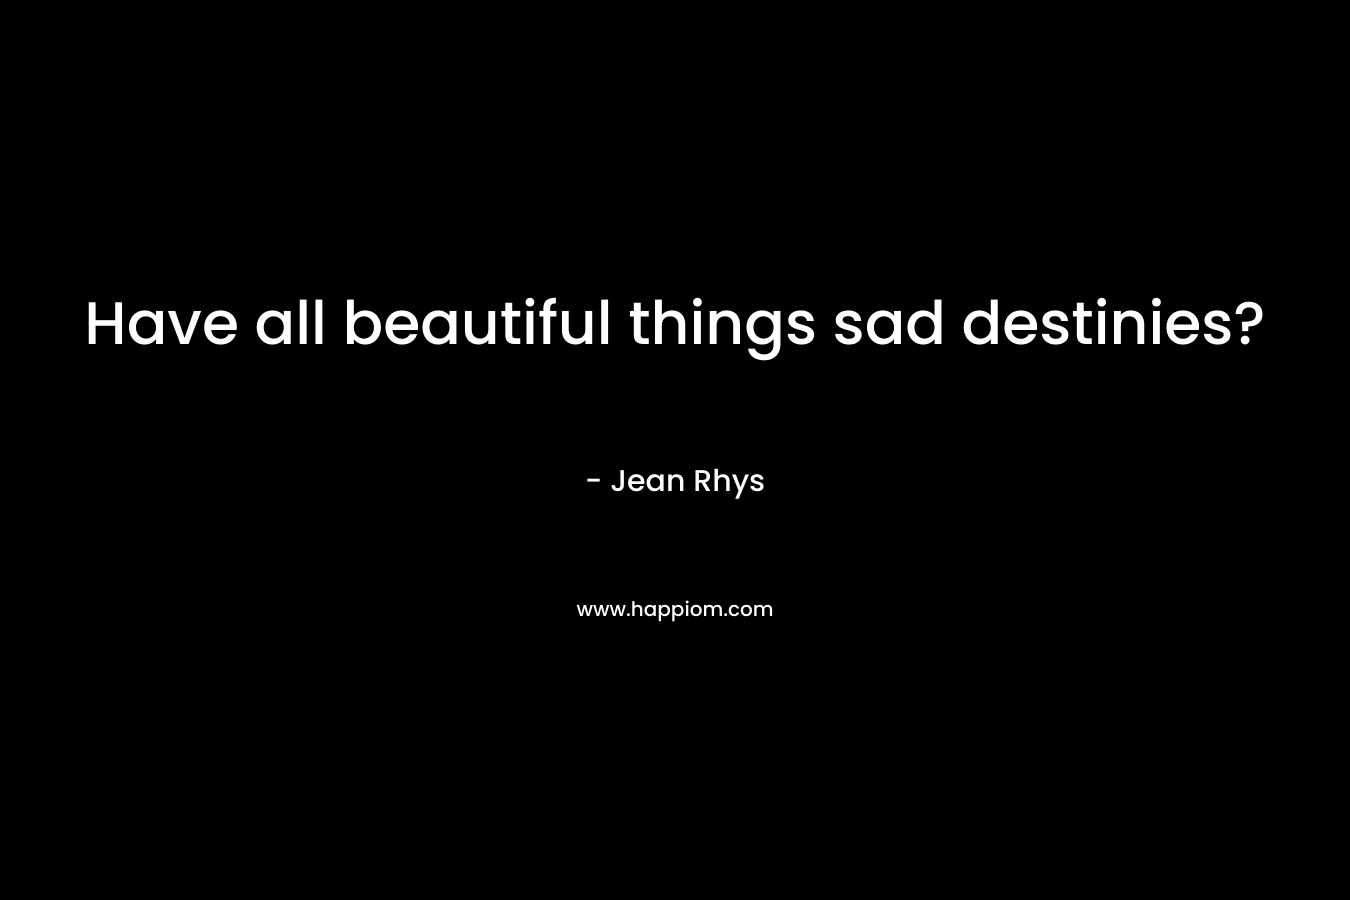 Have all beautiful things sad destinies?